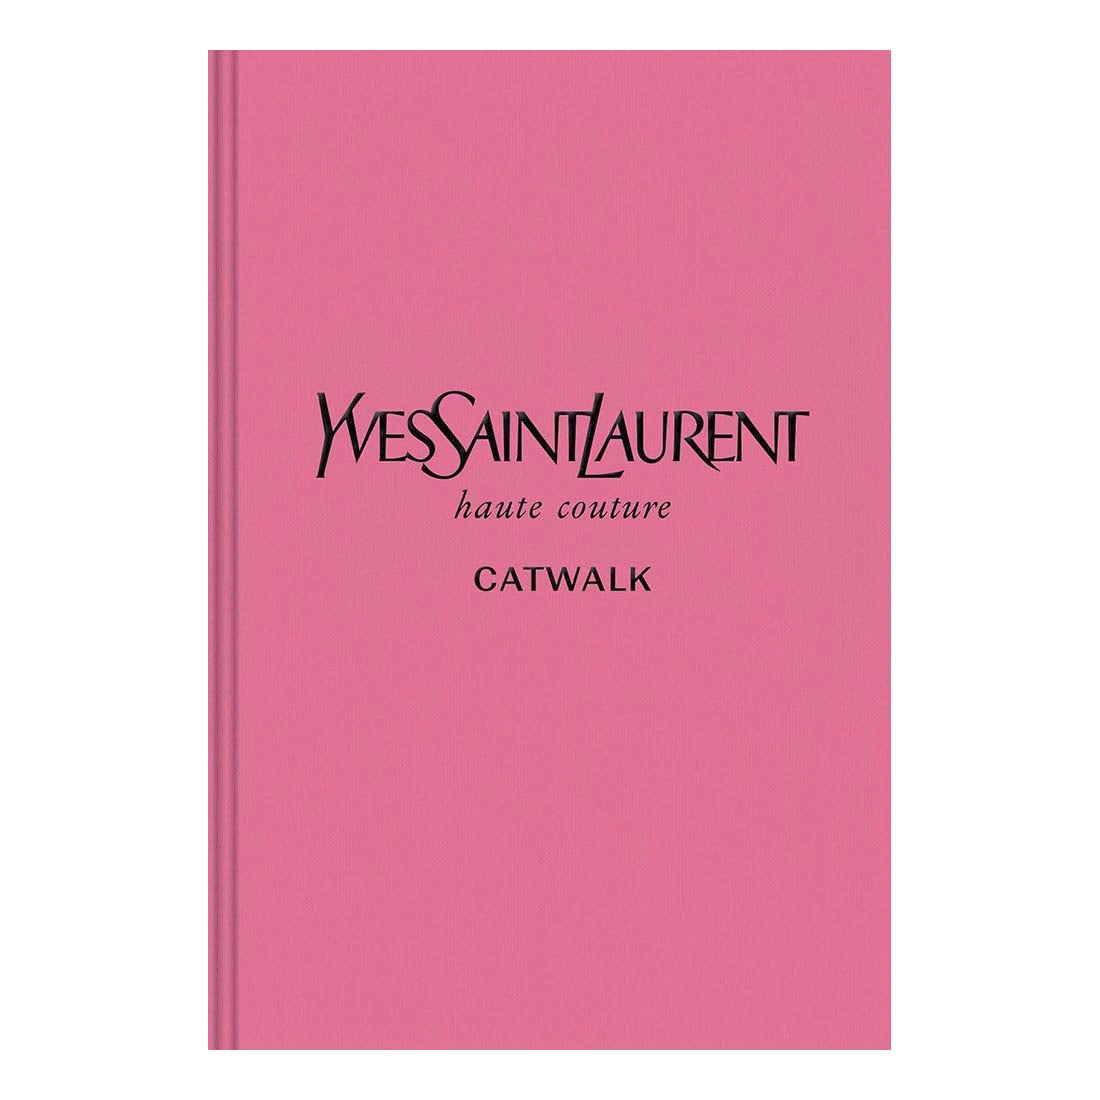 Yves Saint Laurent: The Complete Haute Coutre Collections